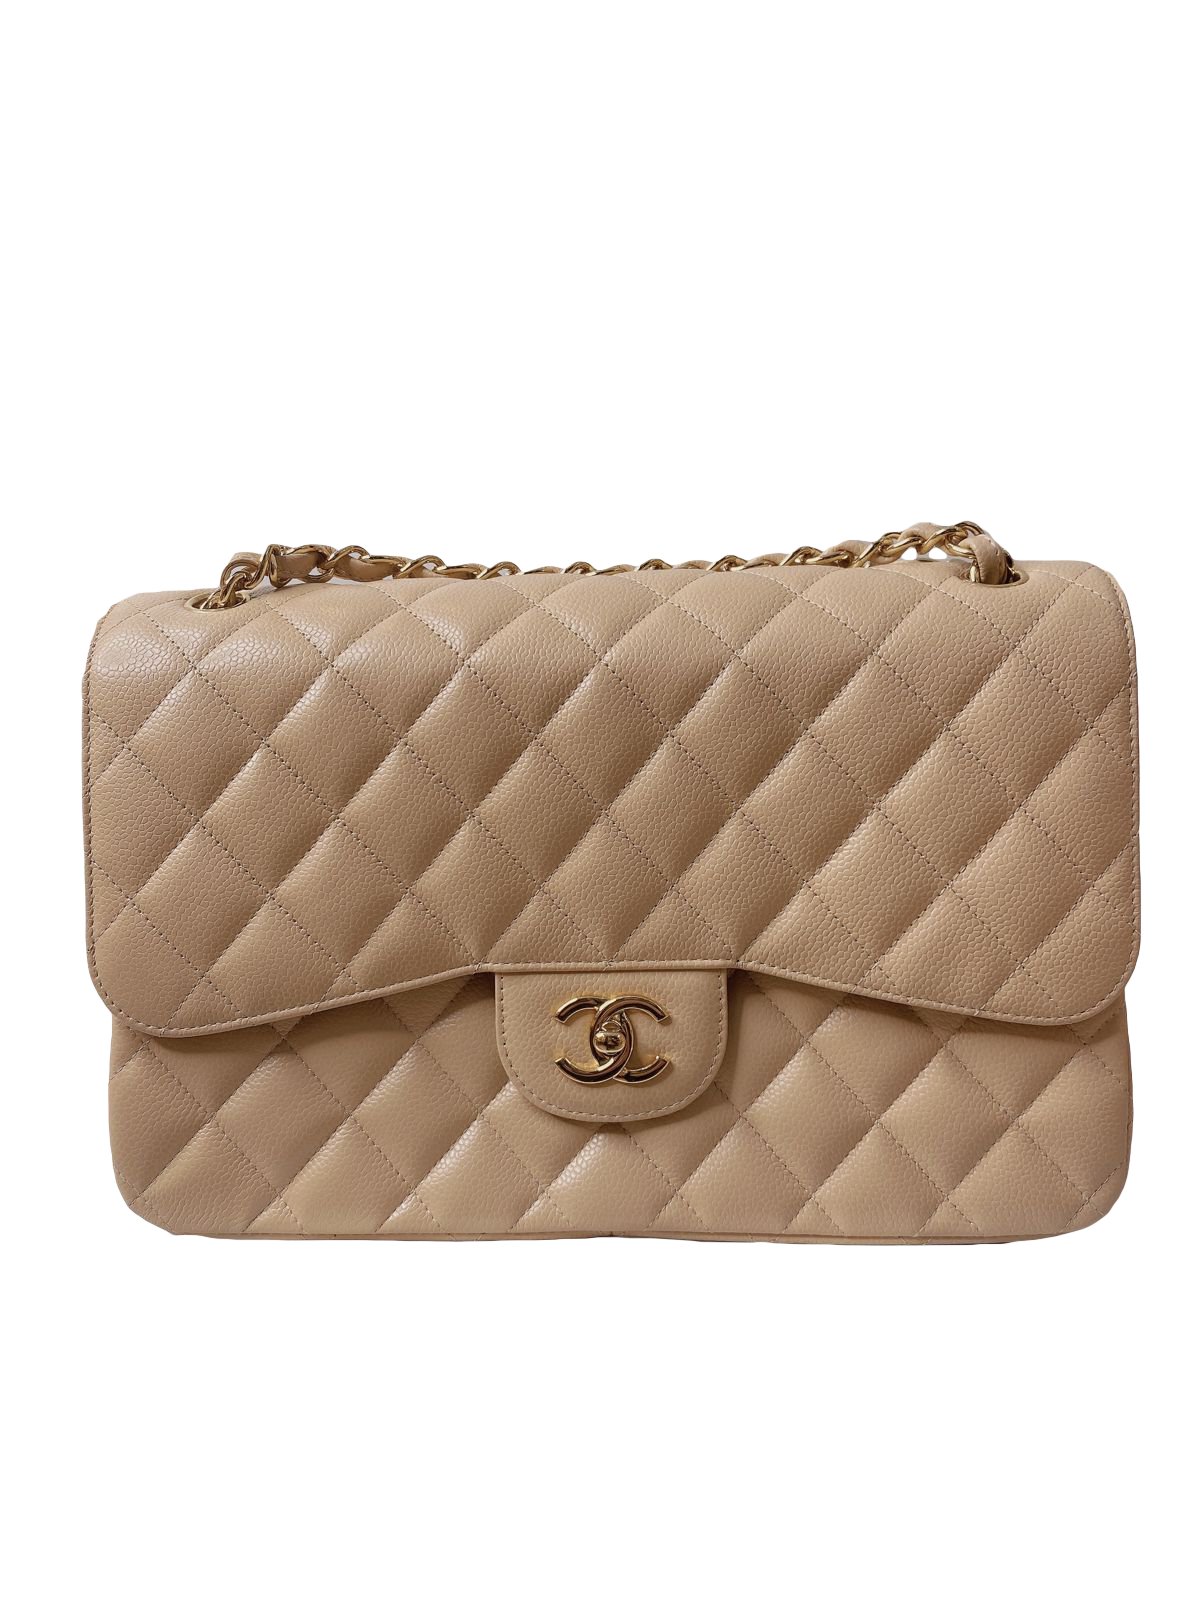 BEIGE CAVIAR QUILTED LEATHER CLASSIC JUMBO DOUBLE FLAP BAG GHW -  styleforless